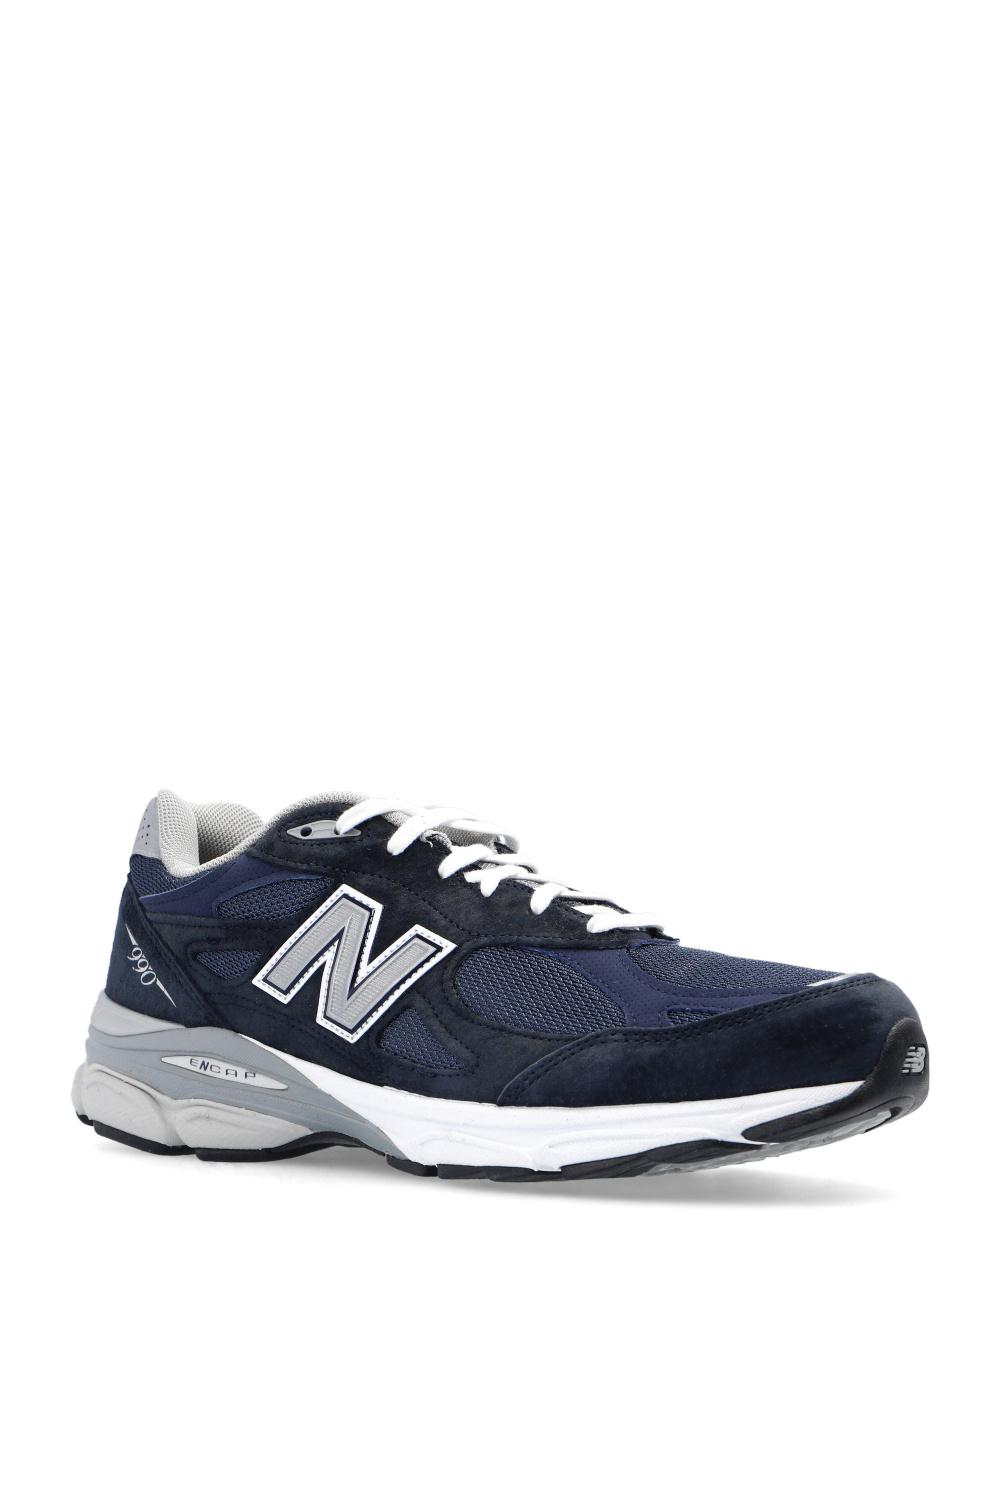 New Balance Leather '990' Sneakers in Navy Blue (Blue) for Men | Lyst